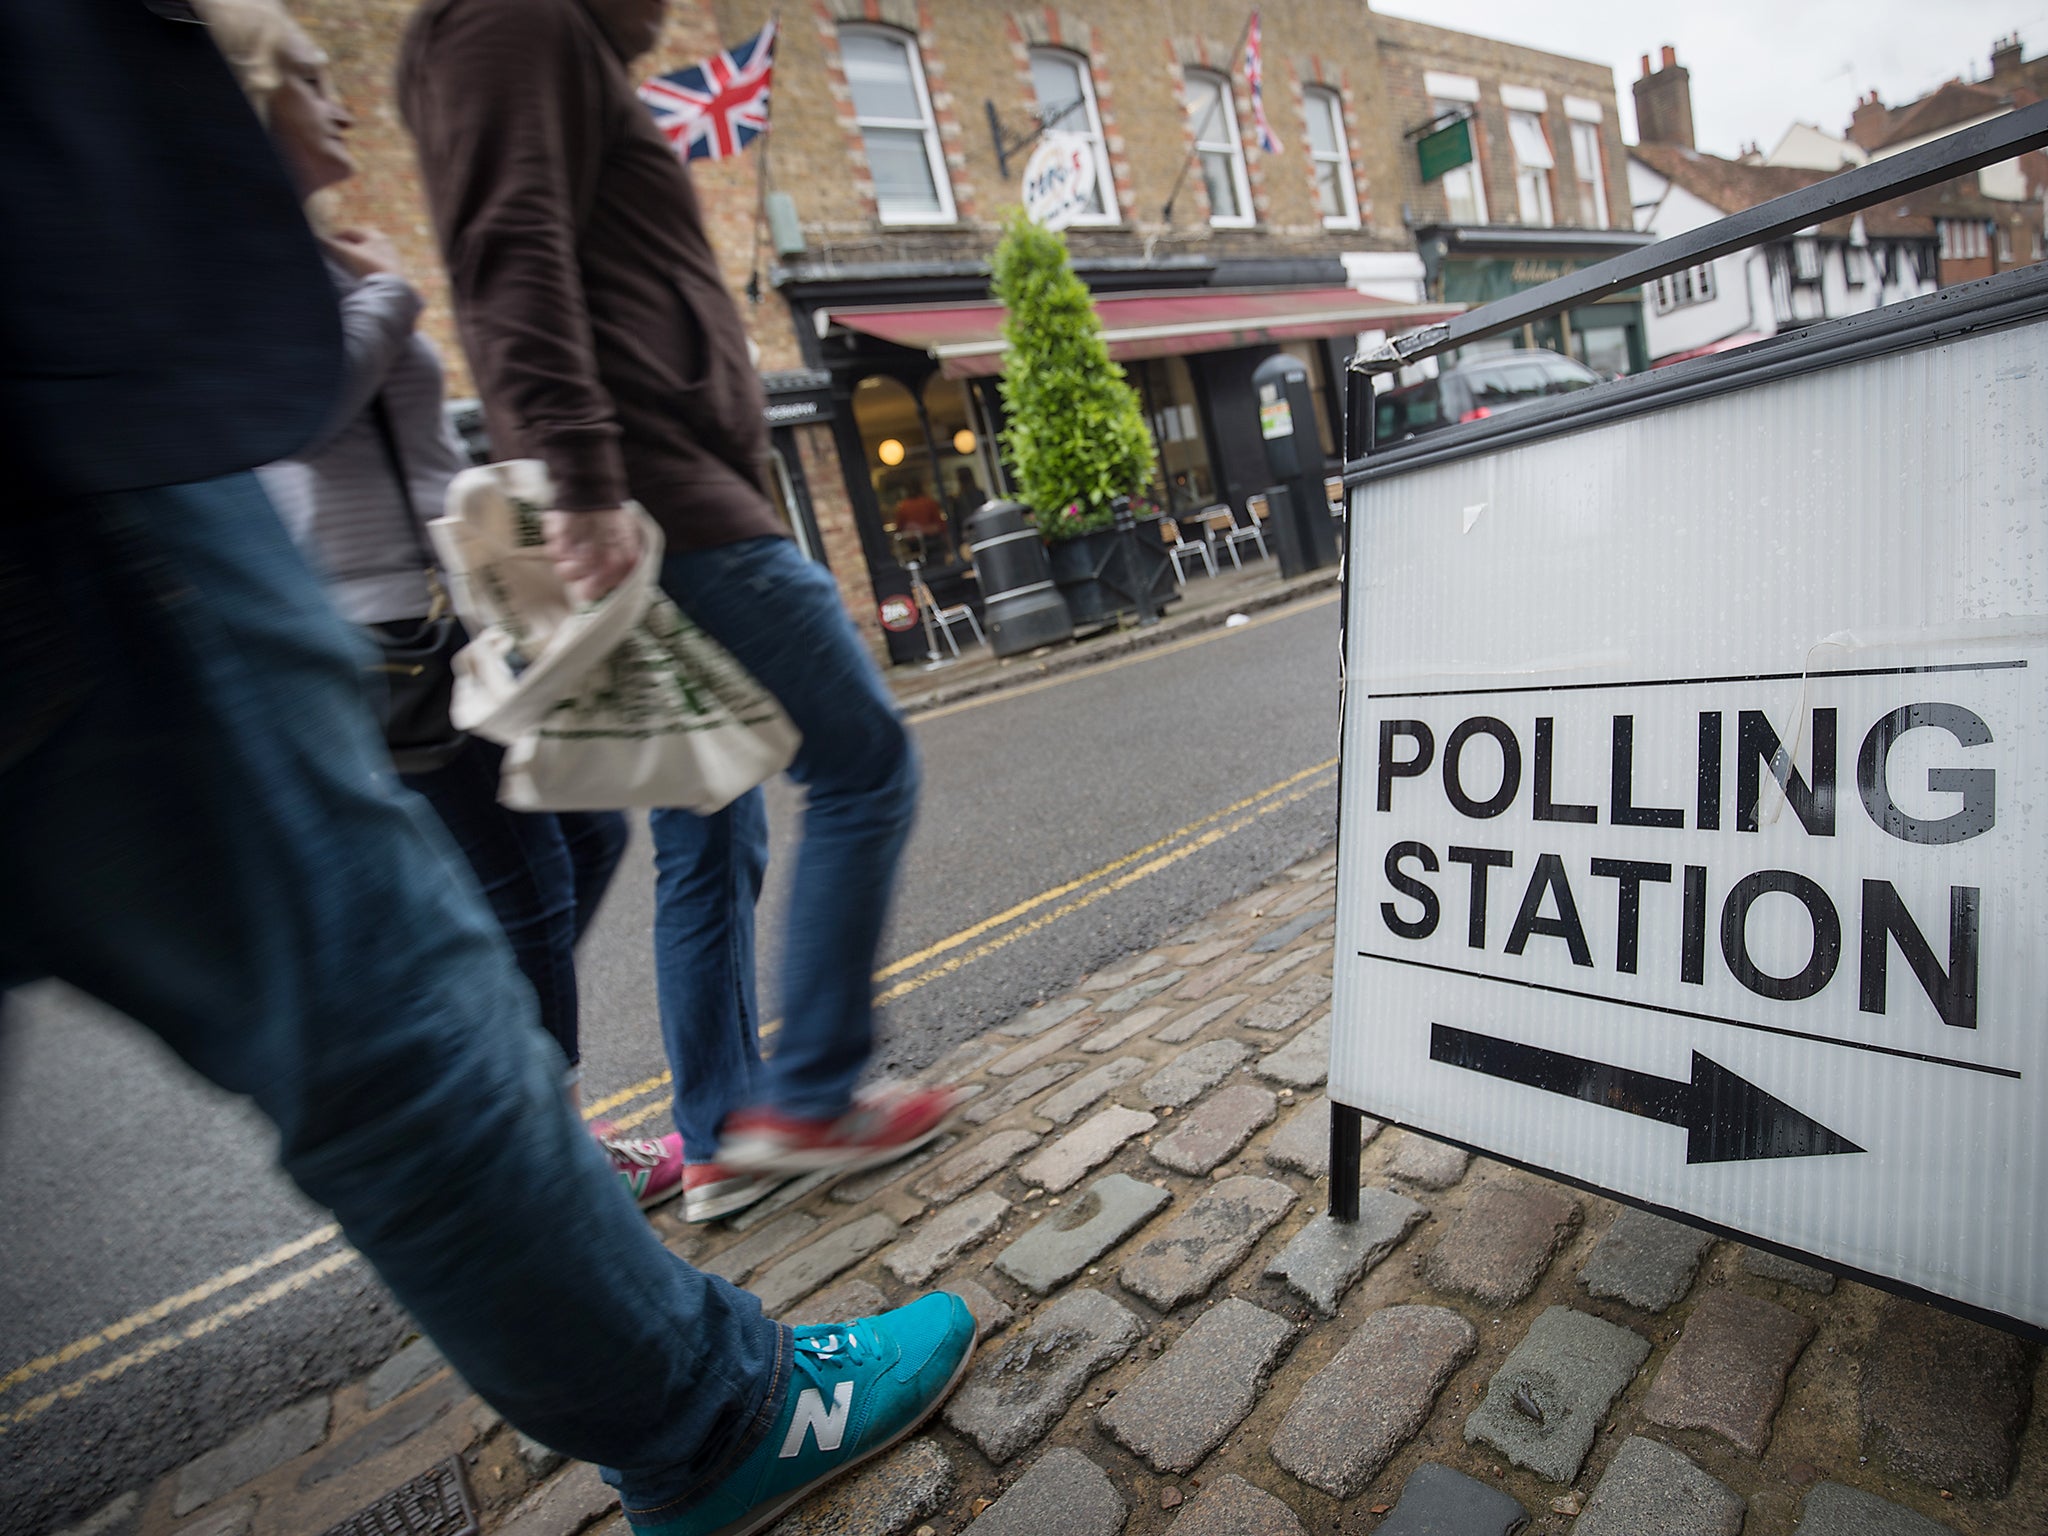 'Policies on corporation tax, employment issues, and positions on Brexit will all bear weighting among business owners at the polling stations on Thursday,' said Rebecca Bonaparte, community manager at startups.co.uk